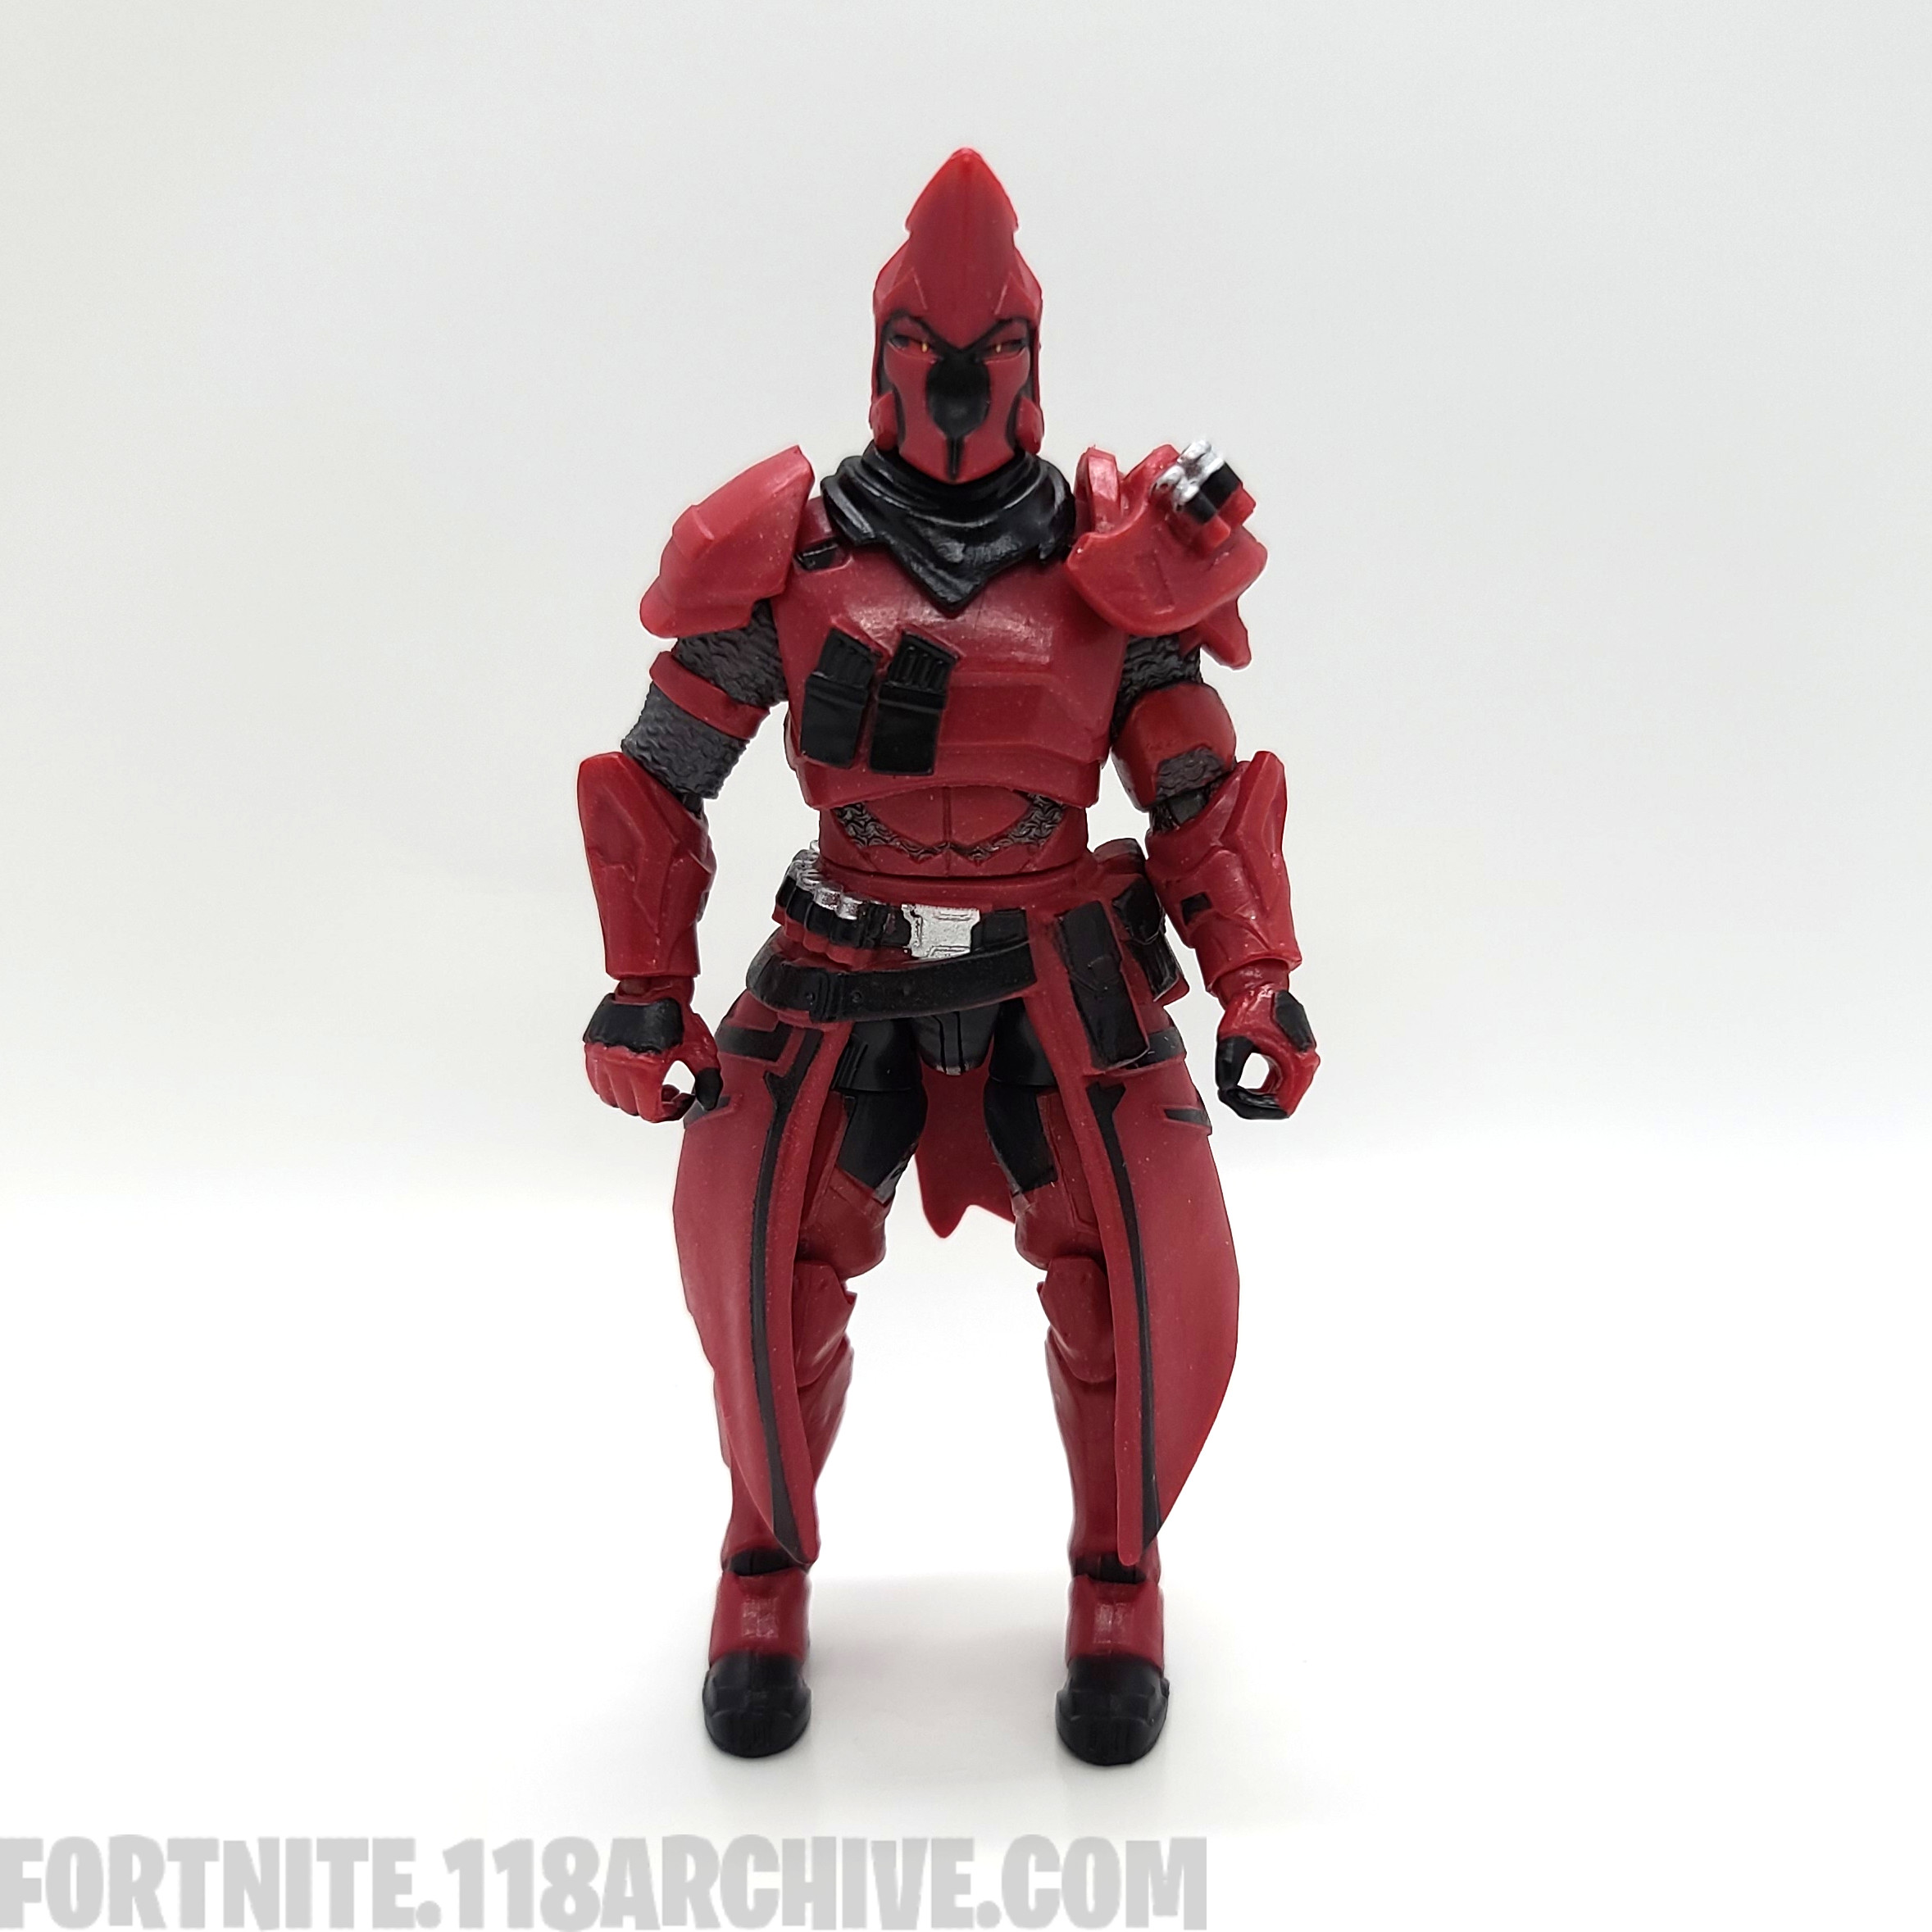 Ultima Knight Red Jazwares Fortnite Action Figure